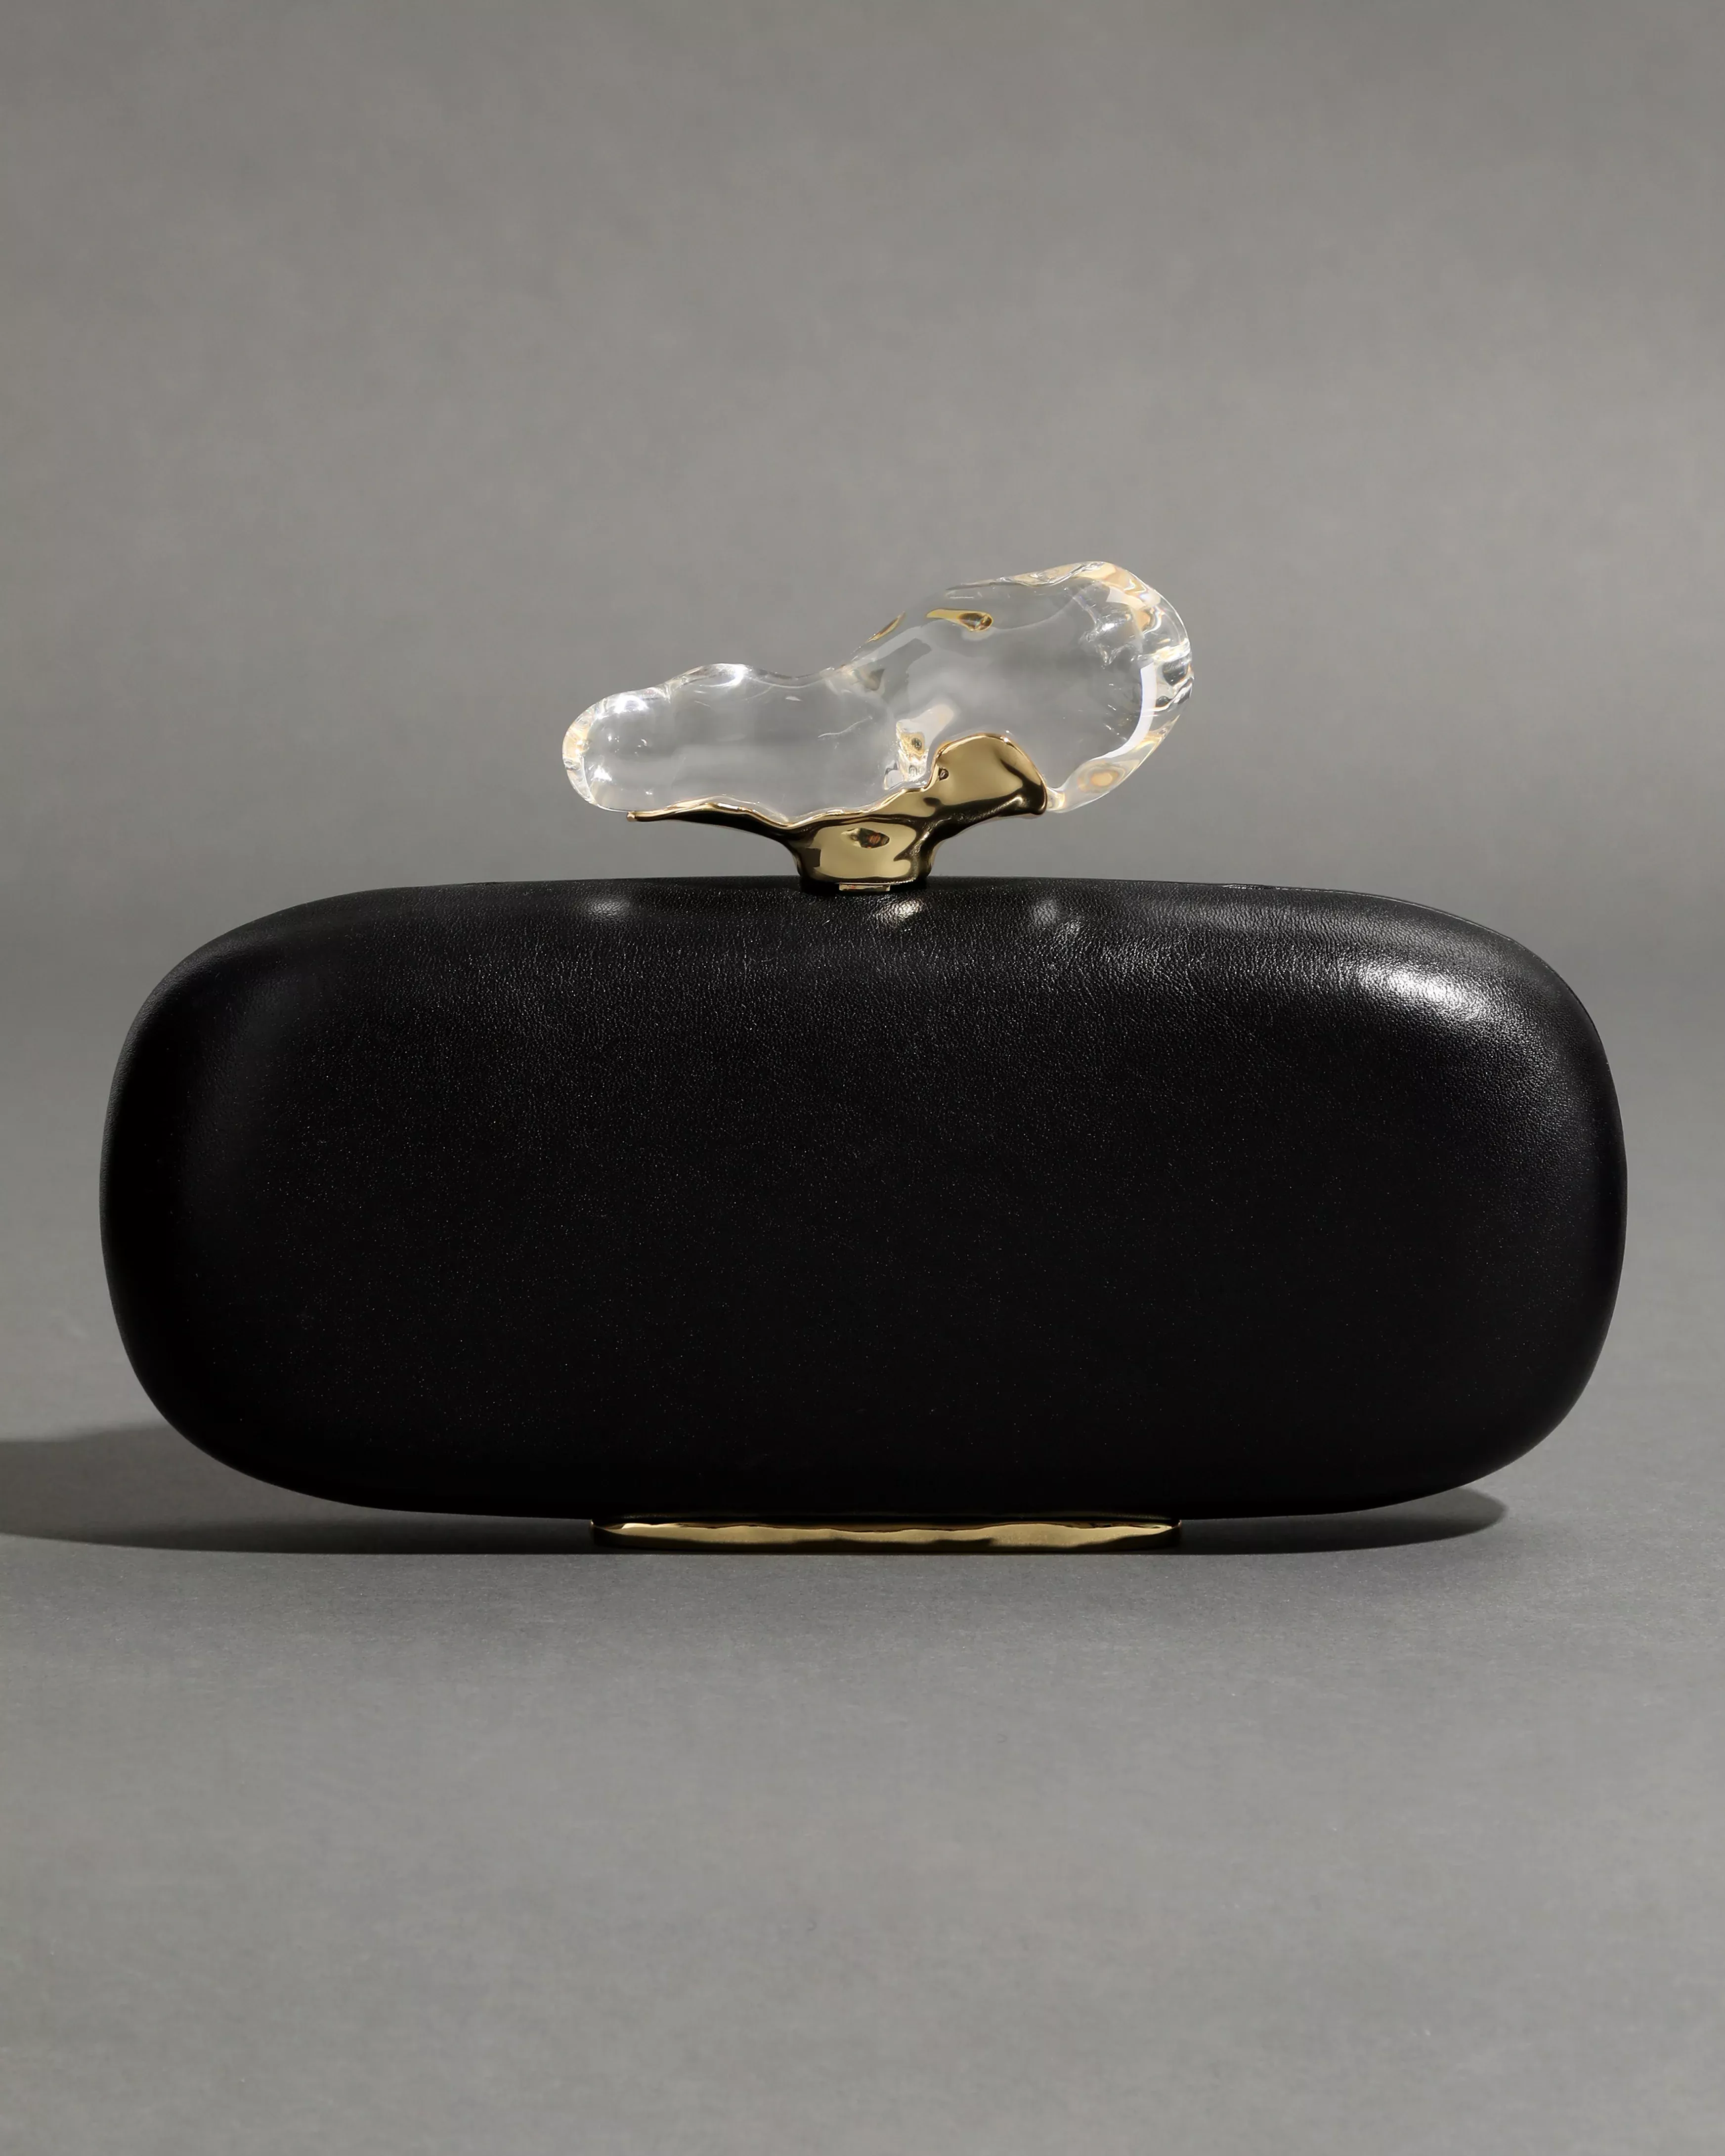 DREAM BAG, Gallery posted by Alexis